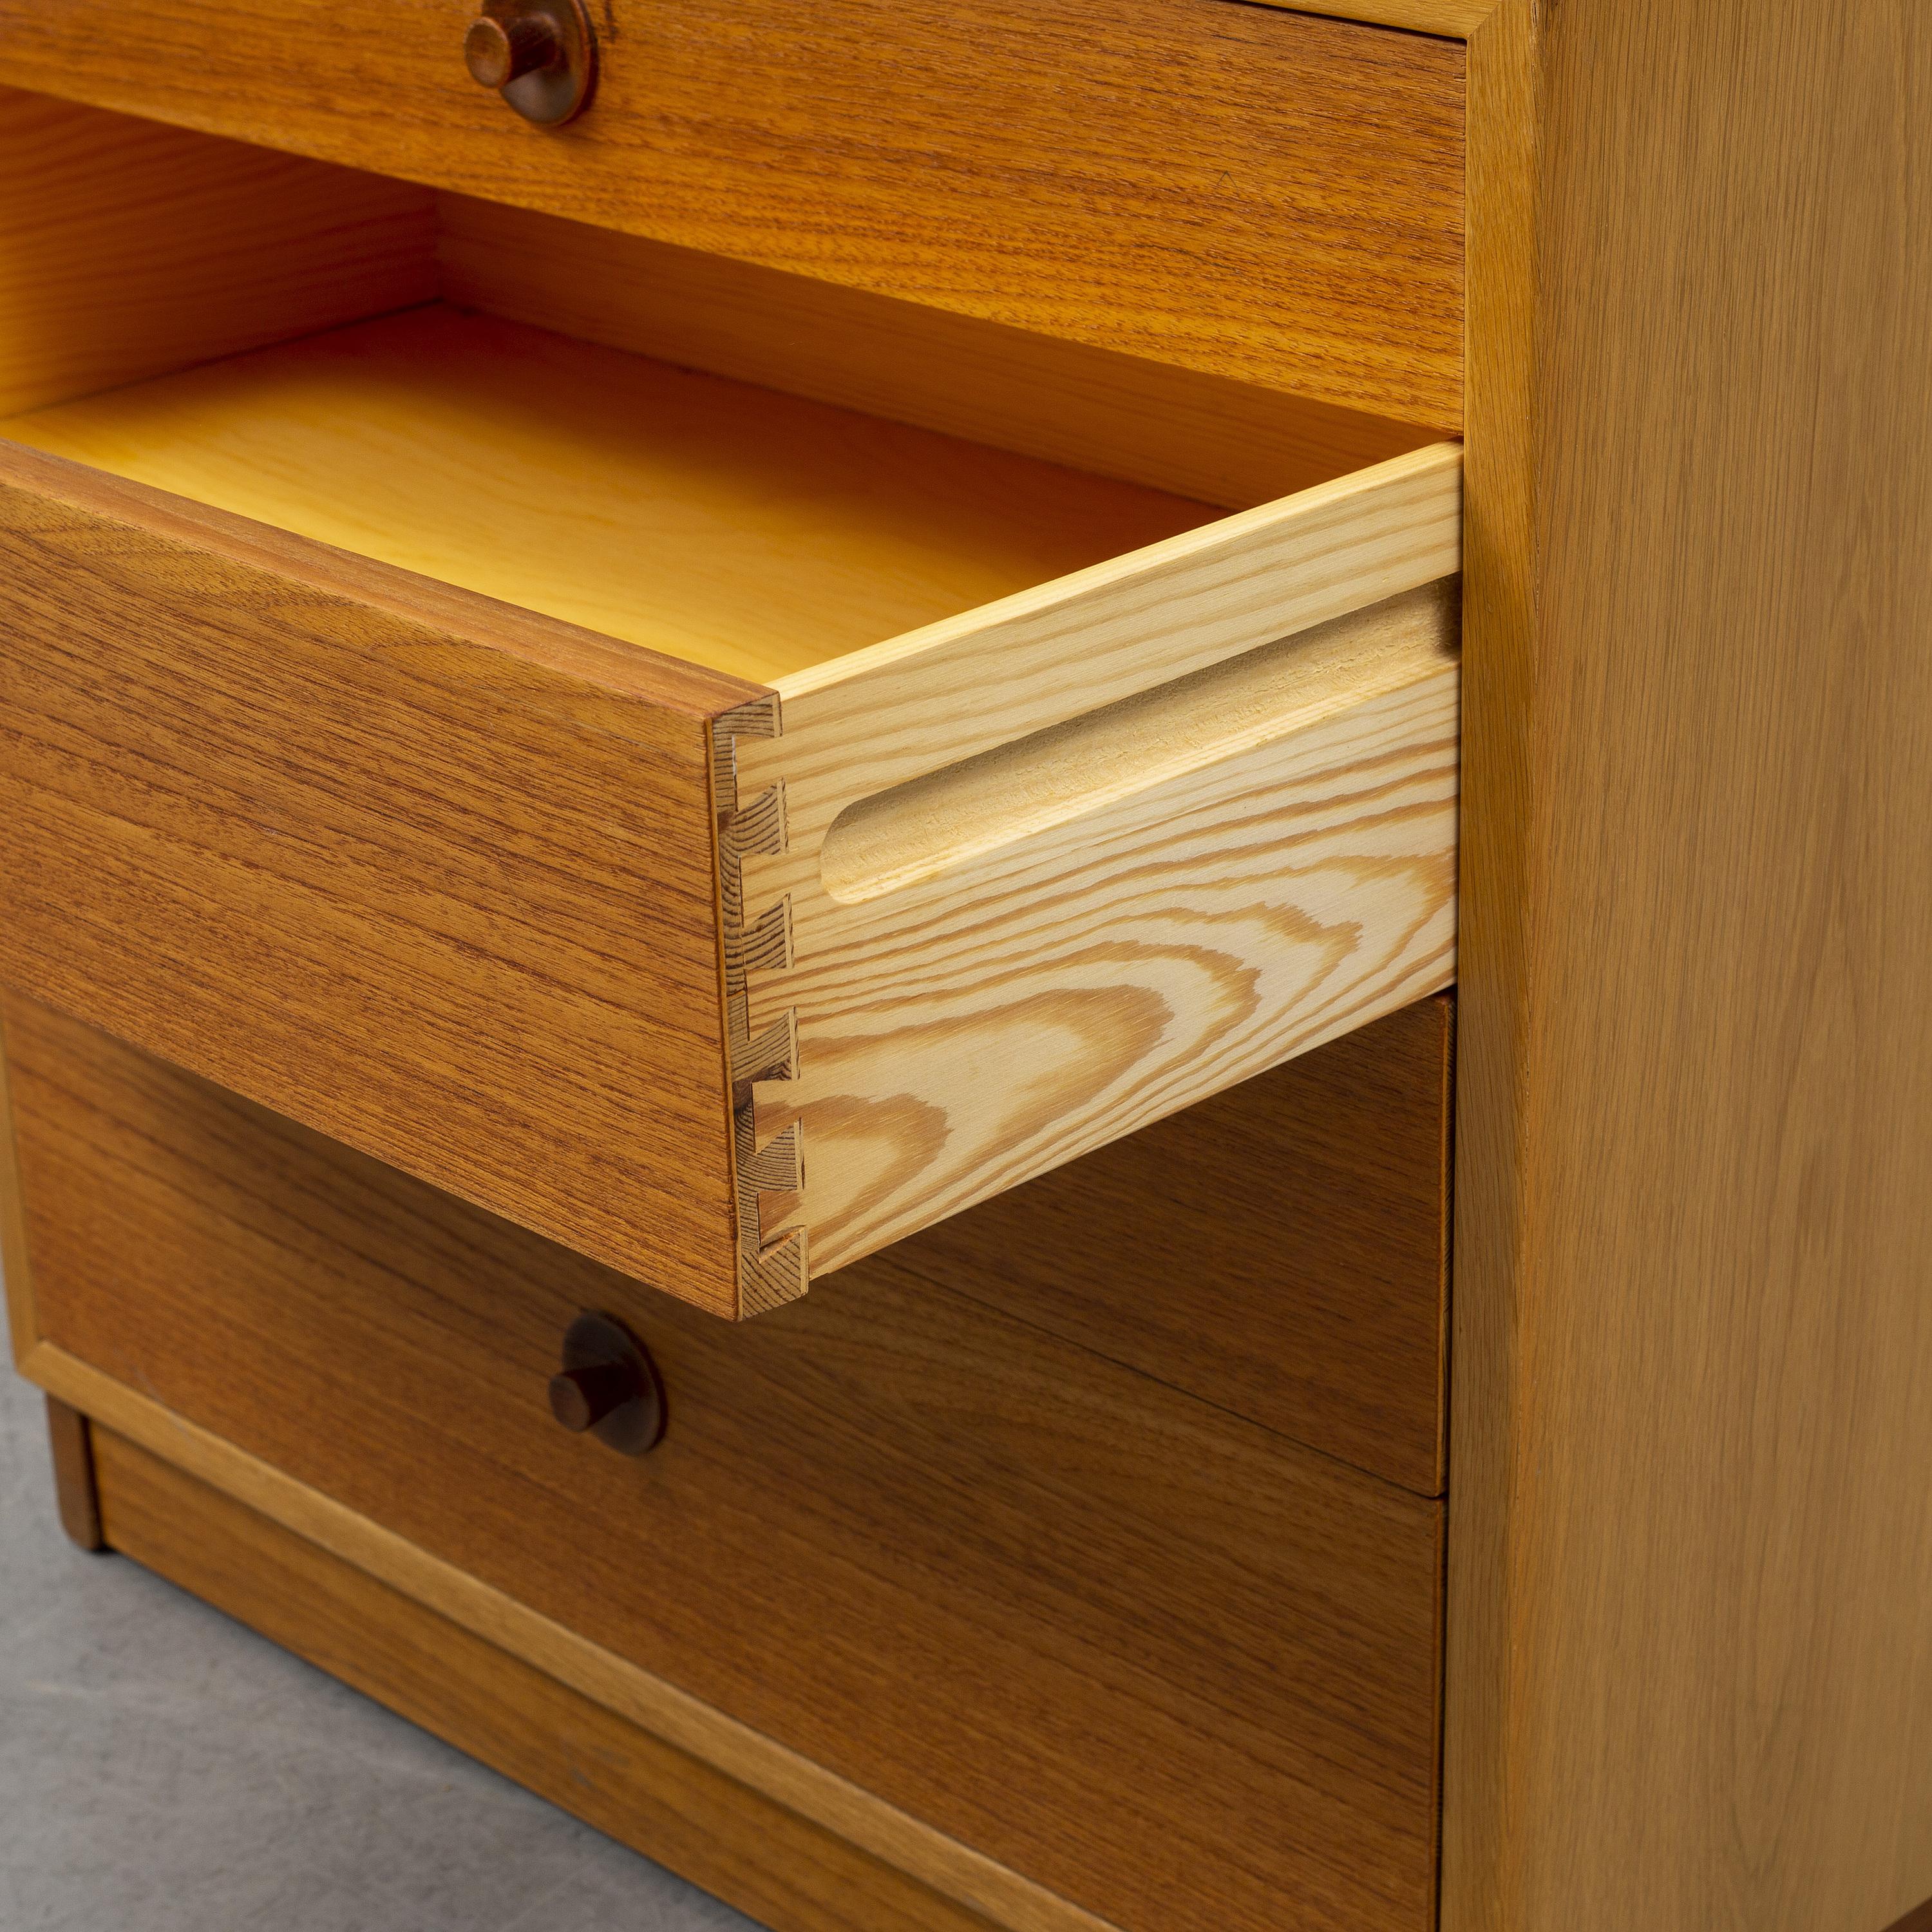 Low chest of drawers in teak and oak. Designed by the Danish designer Børge Mogensen for the cabinetmakers Karl Andersson. Made in Sweden in the 1960s. Excellent original condition.